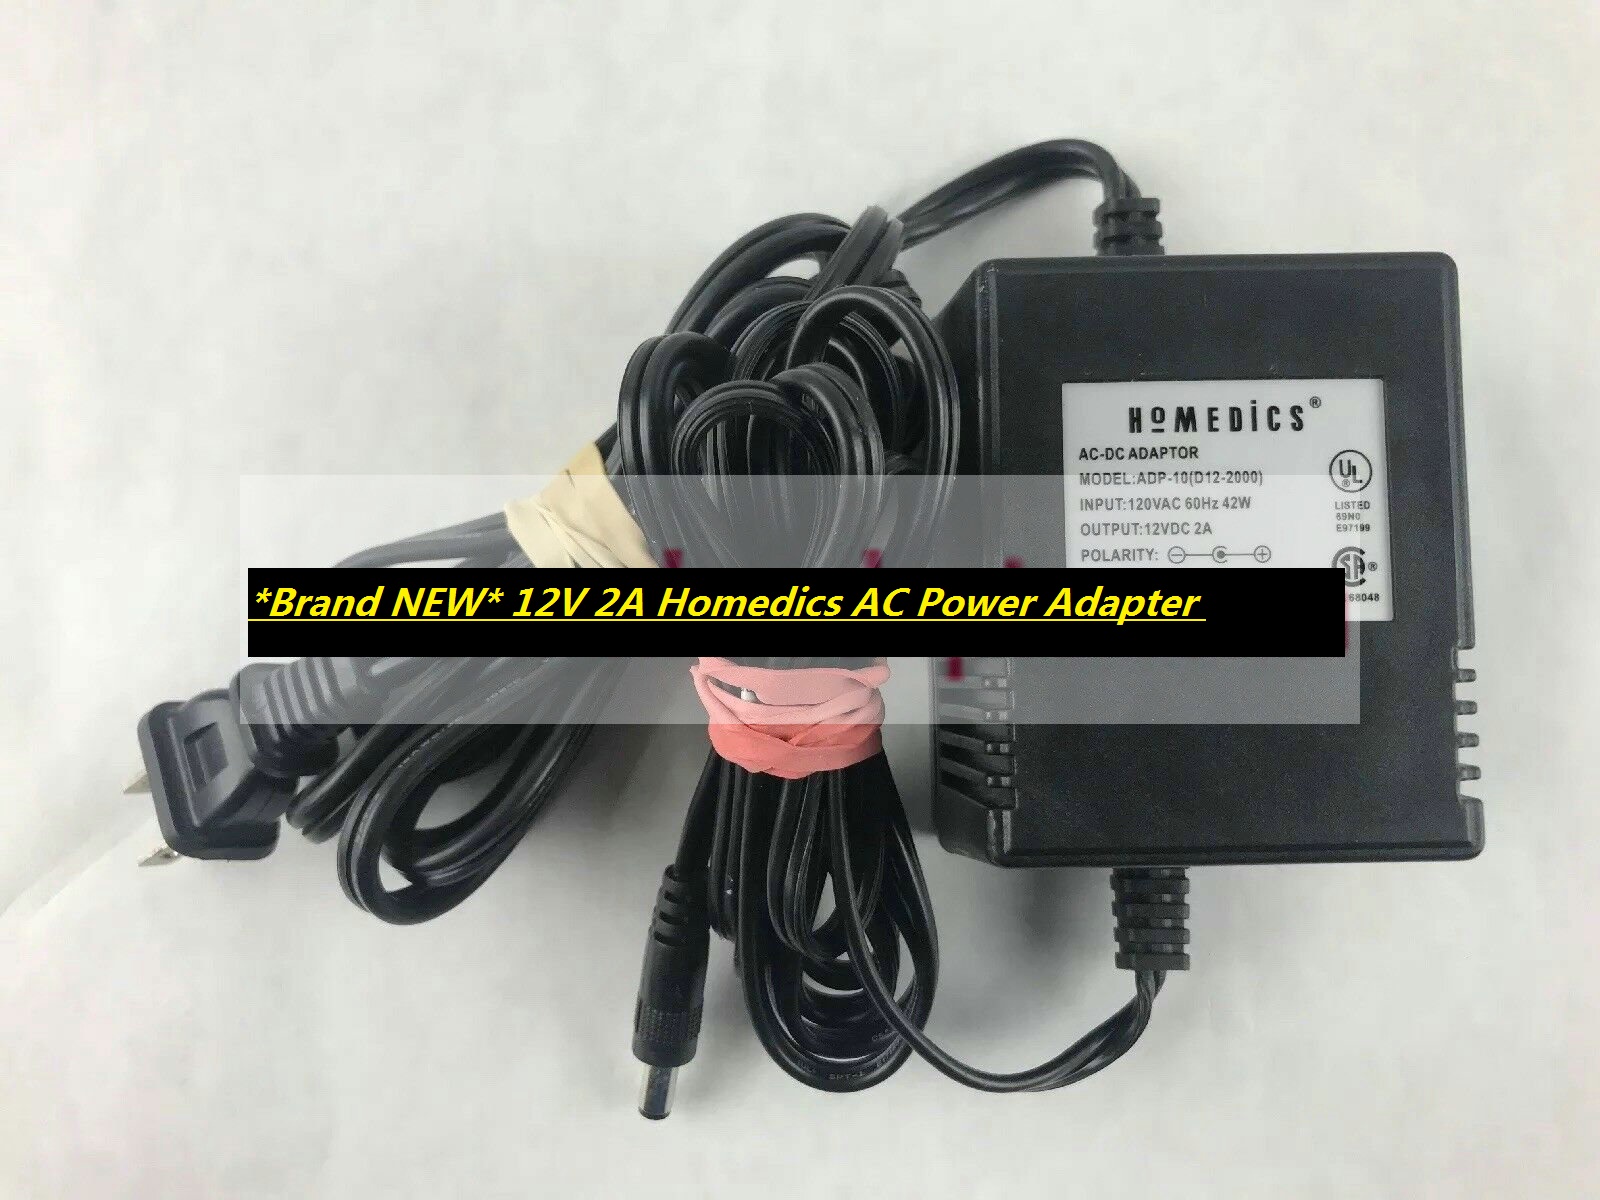 *Brand NEW* 12V 2A Homedics ADP-10 (D12-2000) AC Power Adapter Charger Cord